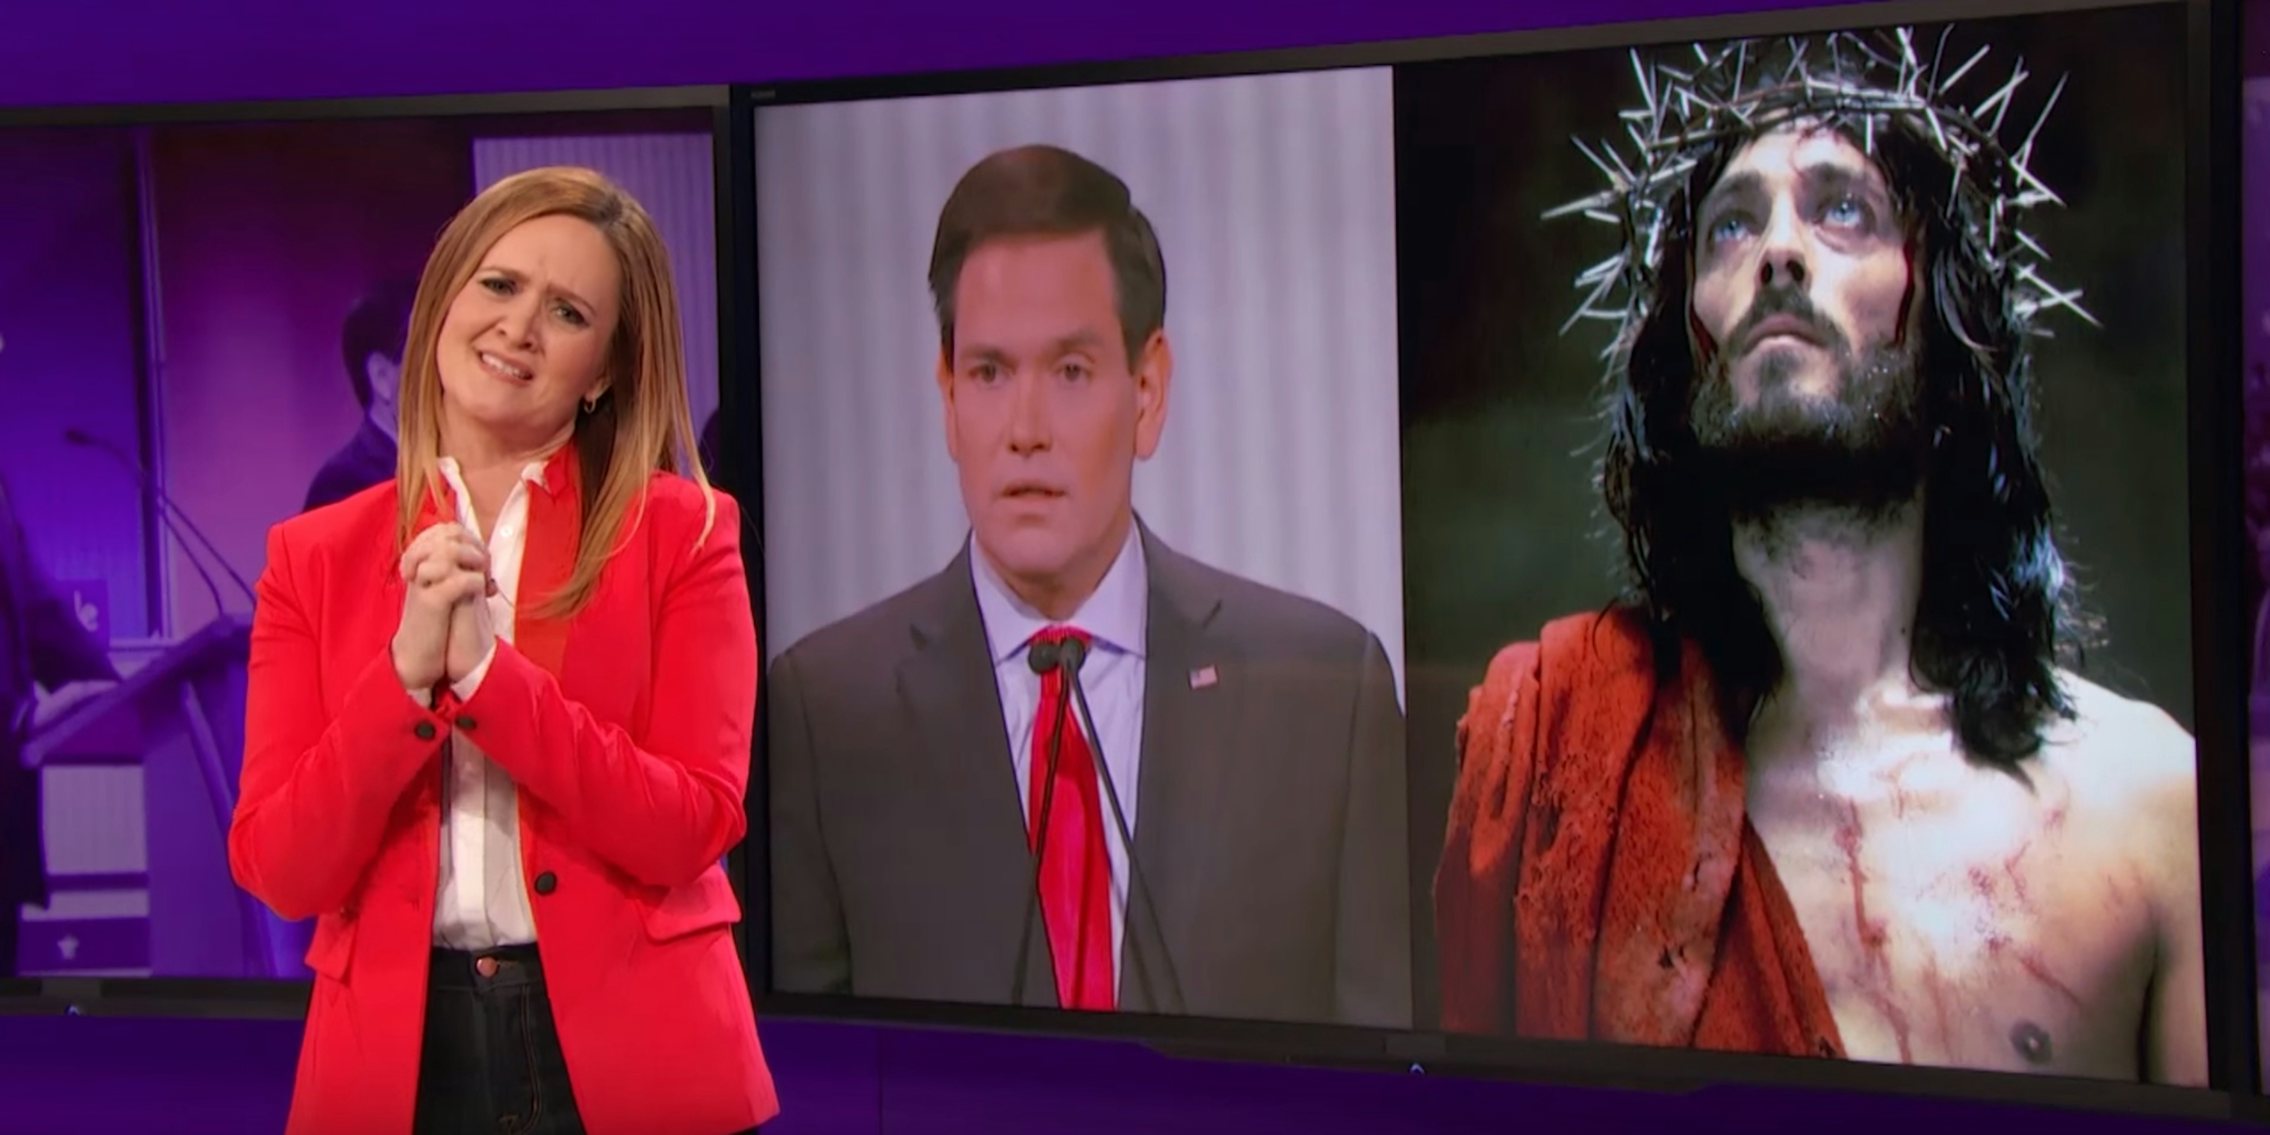 Samantha Bee Expertly Skewers Gop Candidates In A Preview Of Her New Show Full Frontal The